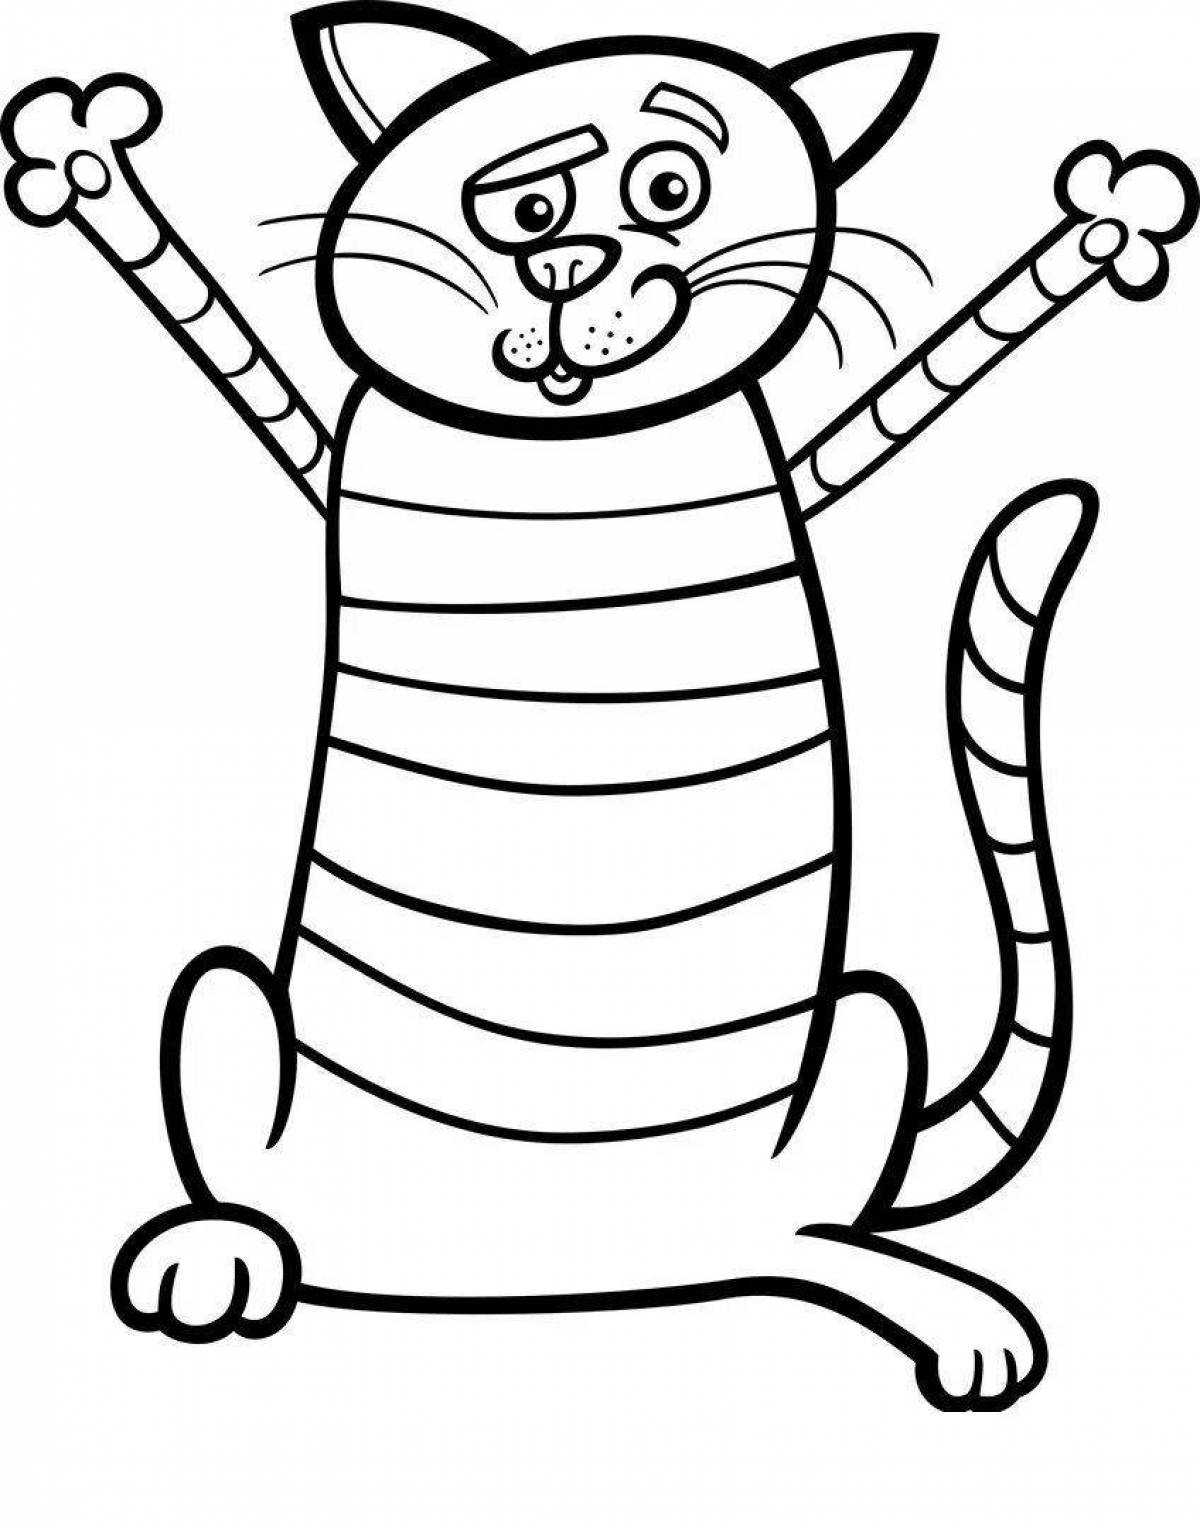 Cozy gray cat coloring page